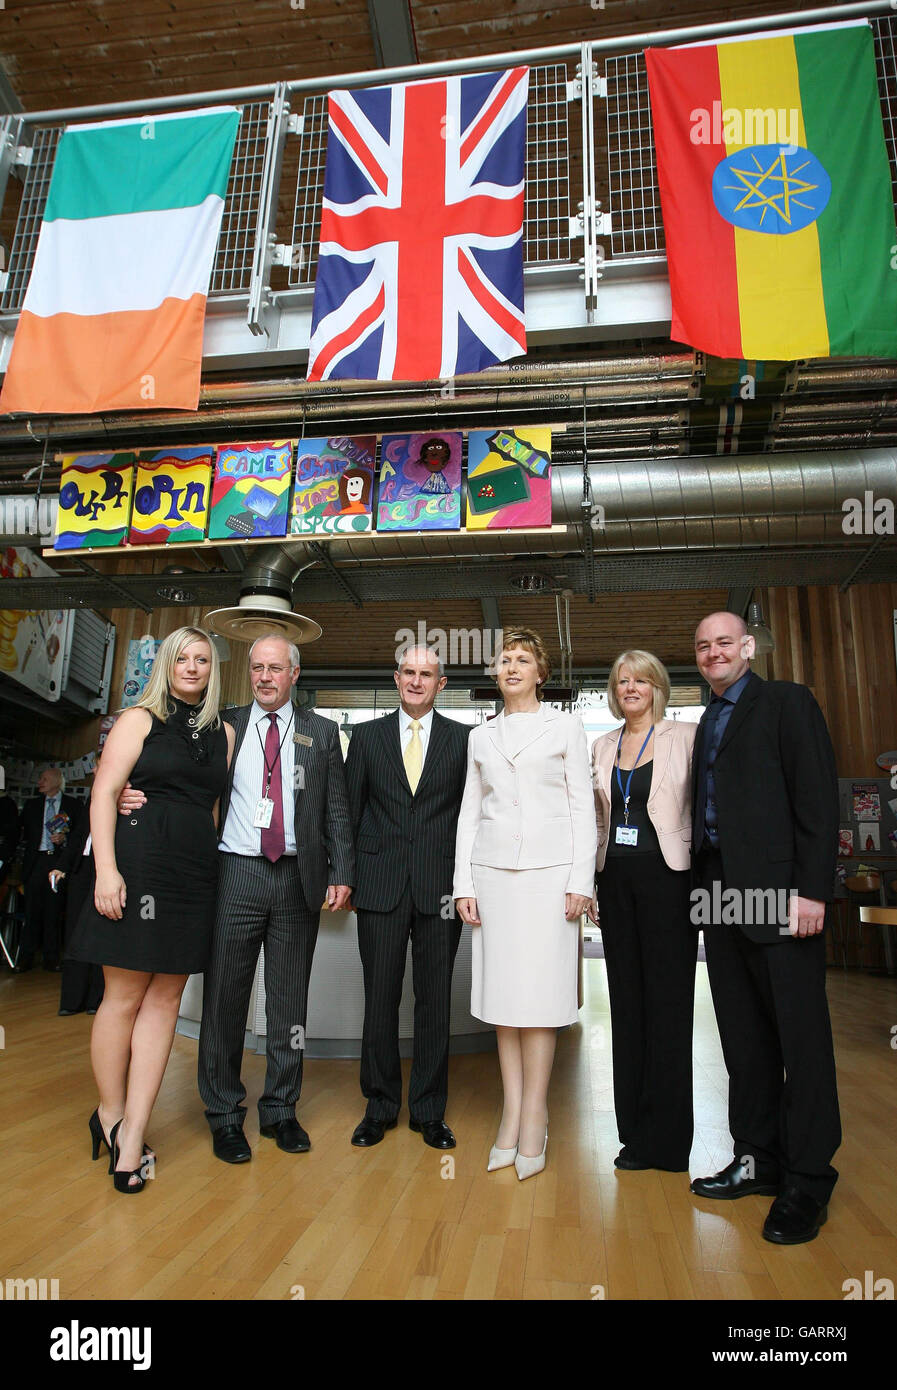 Left to right. Abbie Parry, Colin Parry, Dr Martin McAleese, the Irish President Mary McAleese, Wendy Parry and William Fields (partner of Abbie) at the Peace Centre in Warrington, named after Johnathan Ball and Tim Parry who were killed by an IRA bomb in 1993. Stock Photo